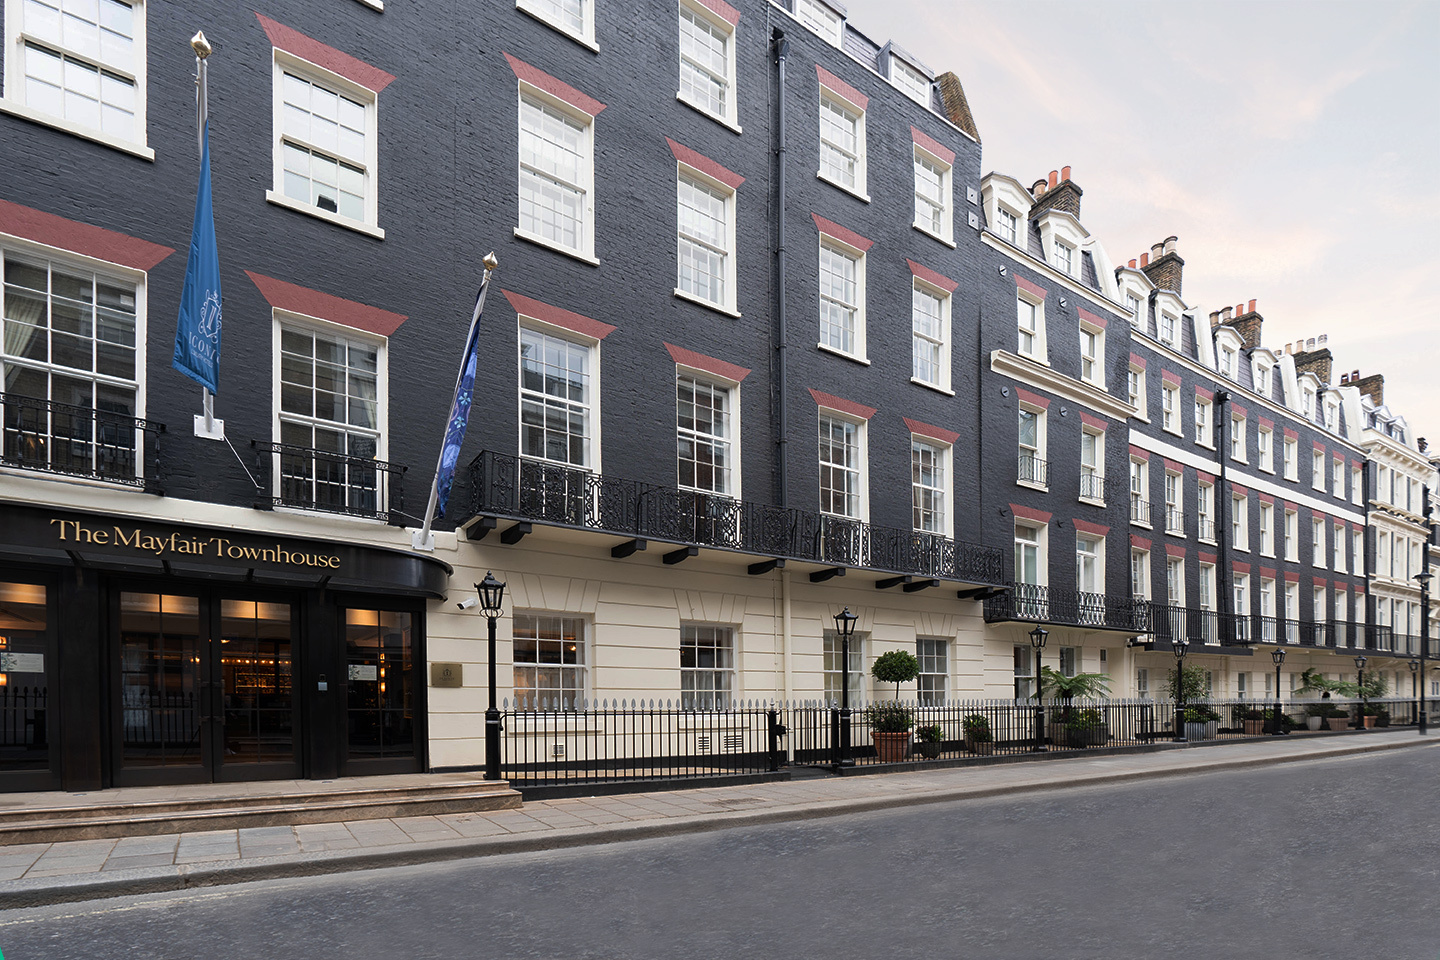 BSBG completes The Mayfair Townhouse handover | Brewer Smith Brewer Group